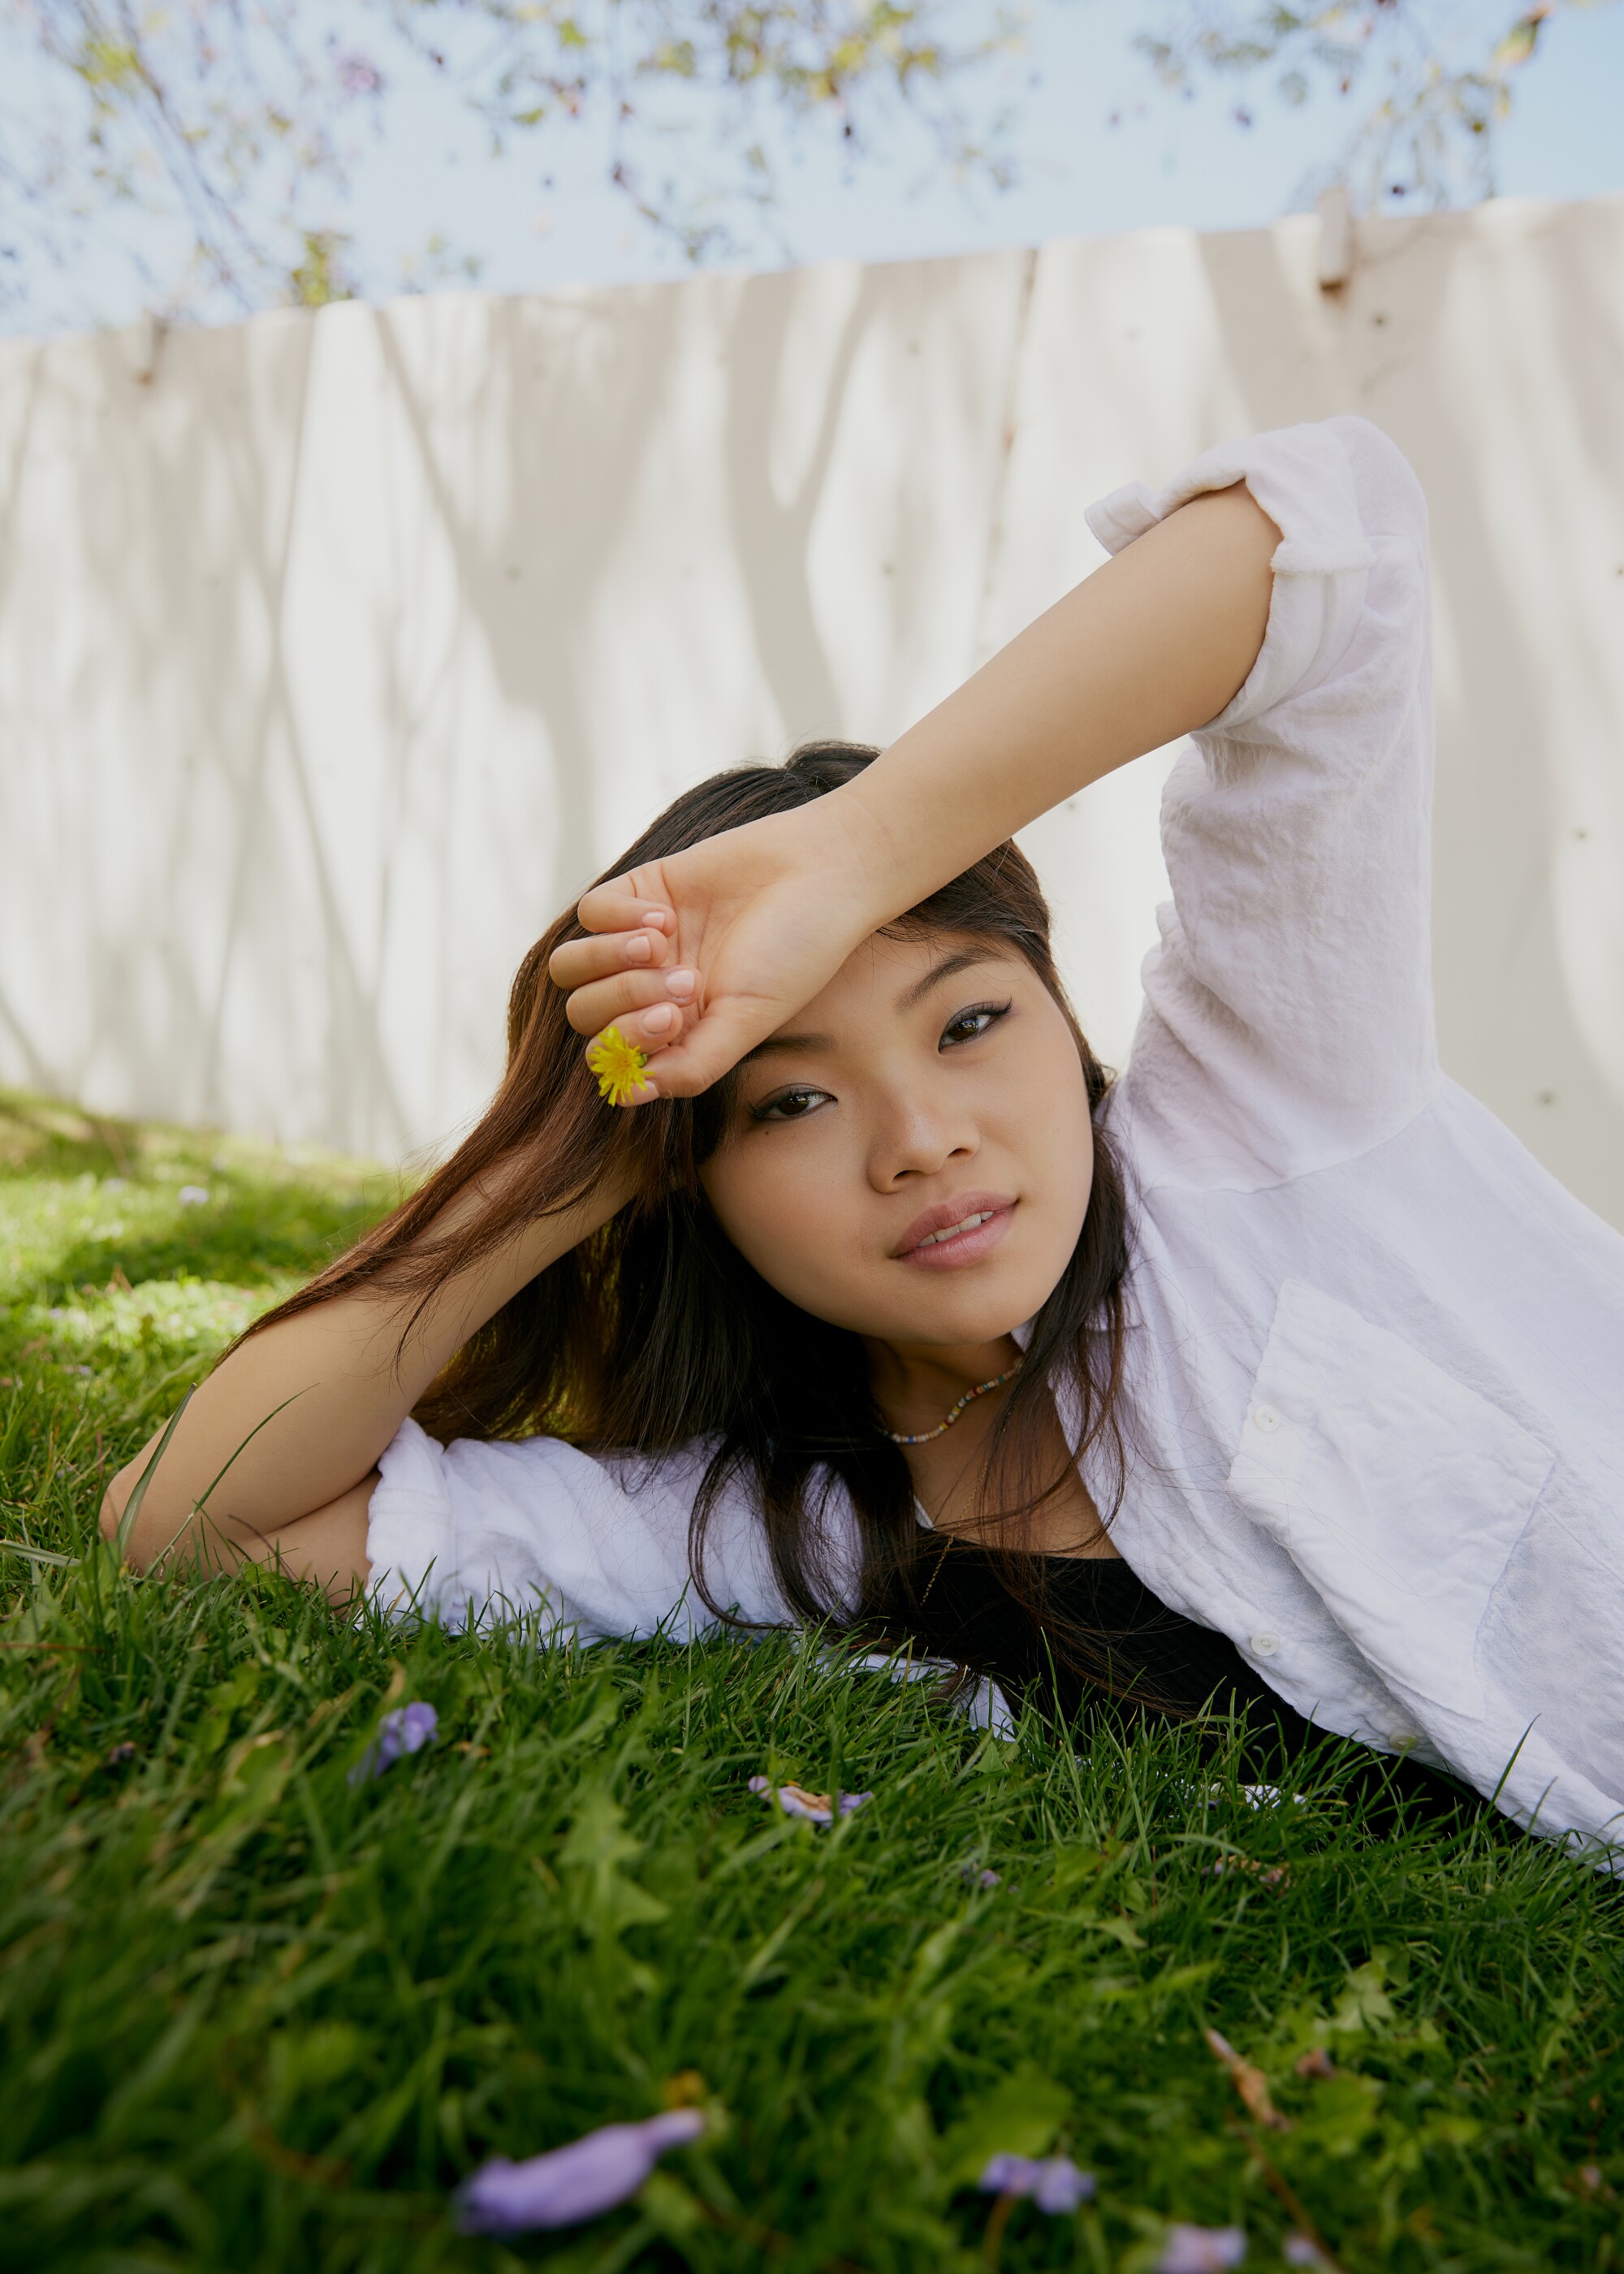 Miya Cech lays on the grass holding a small yellow flower.